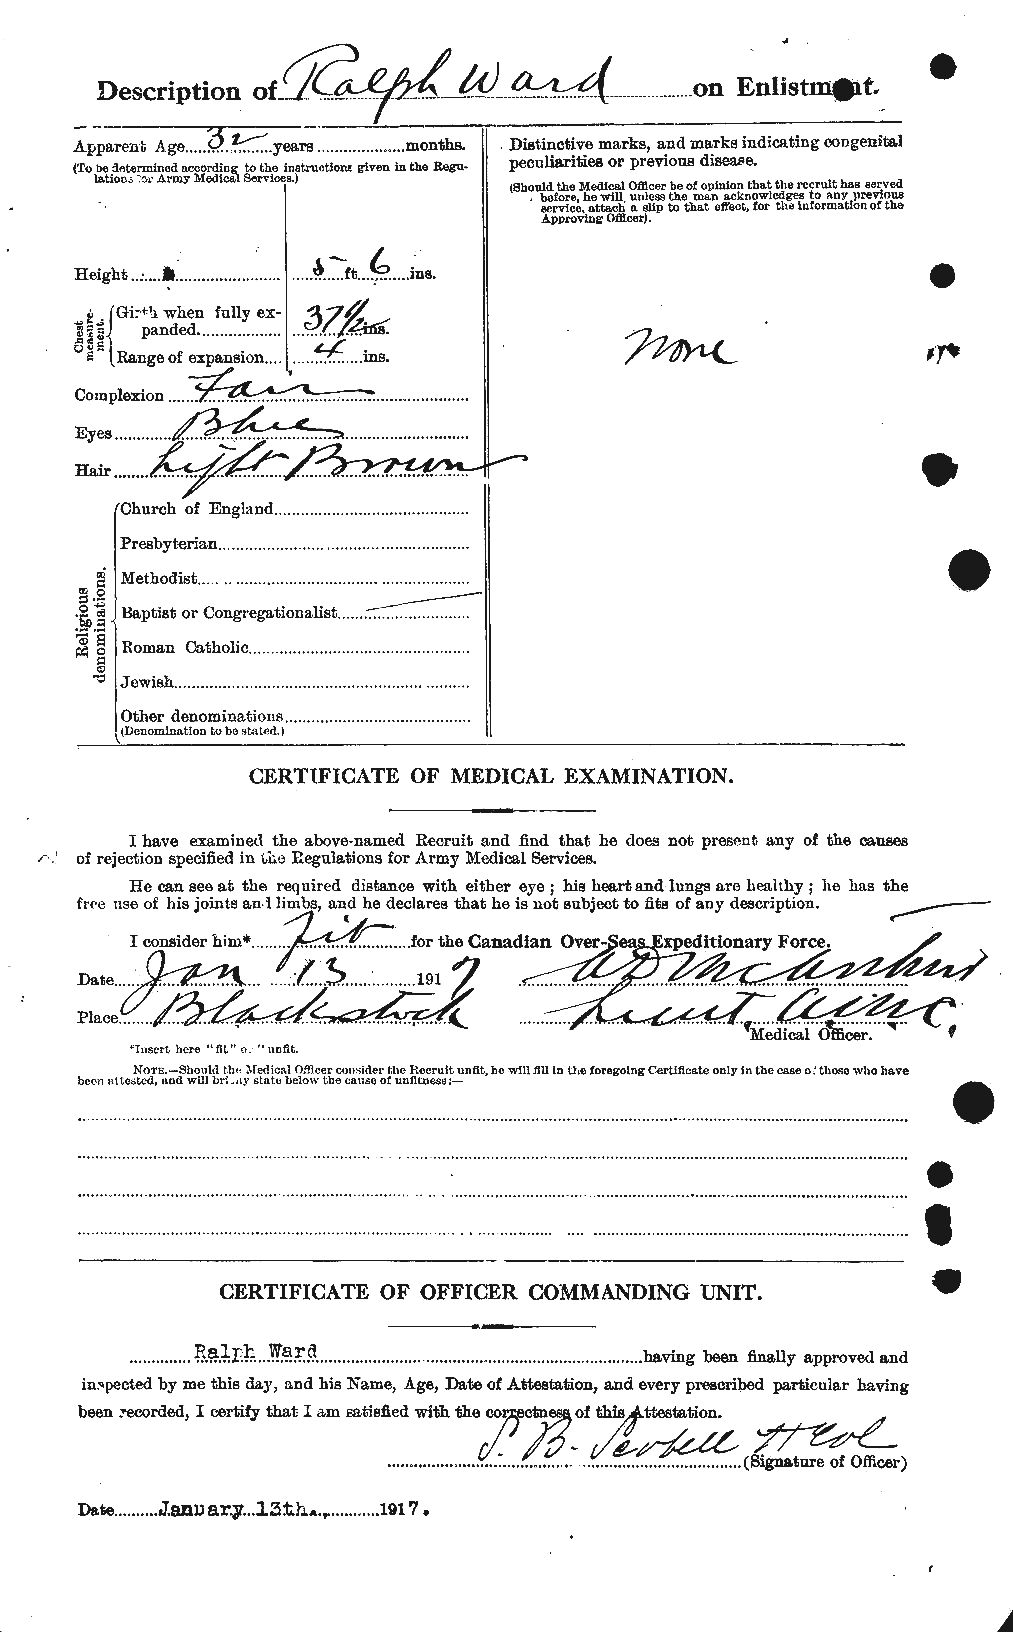 Personnel Records of the First World War - CEF 659632b